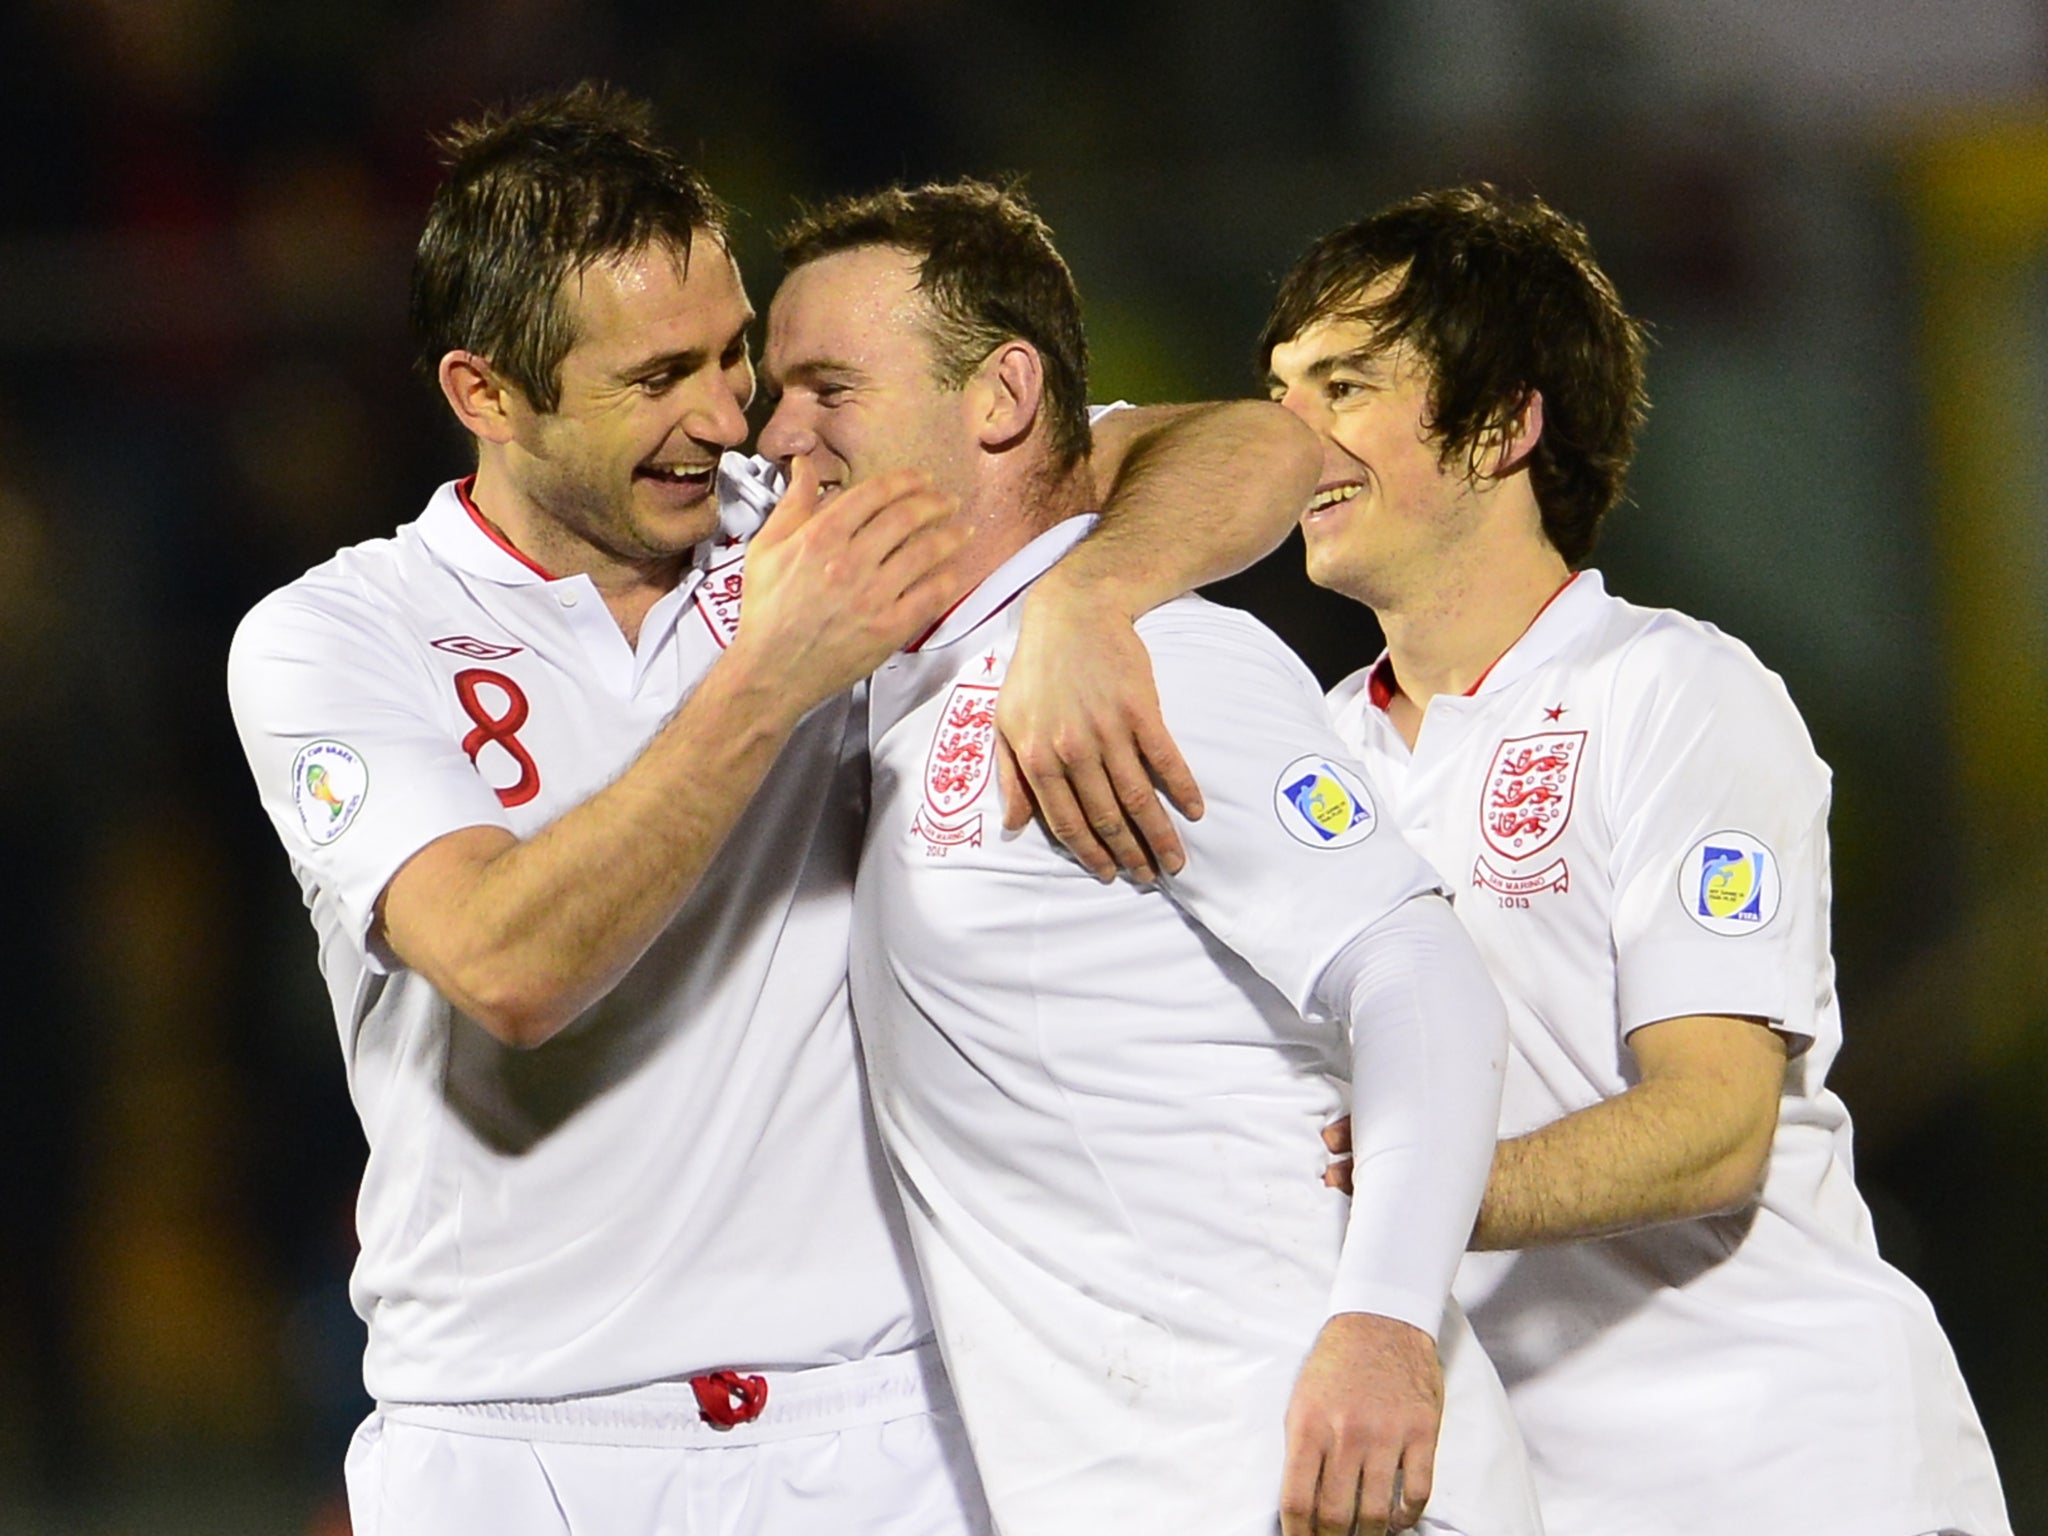 Frank Lampard has said he would welcome Wayne Rooney to Chelsea should he sign for the Blues